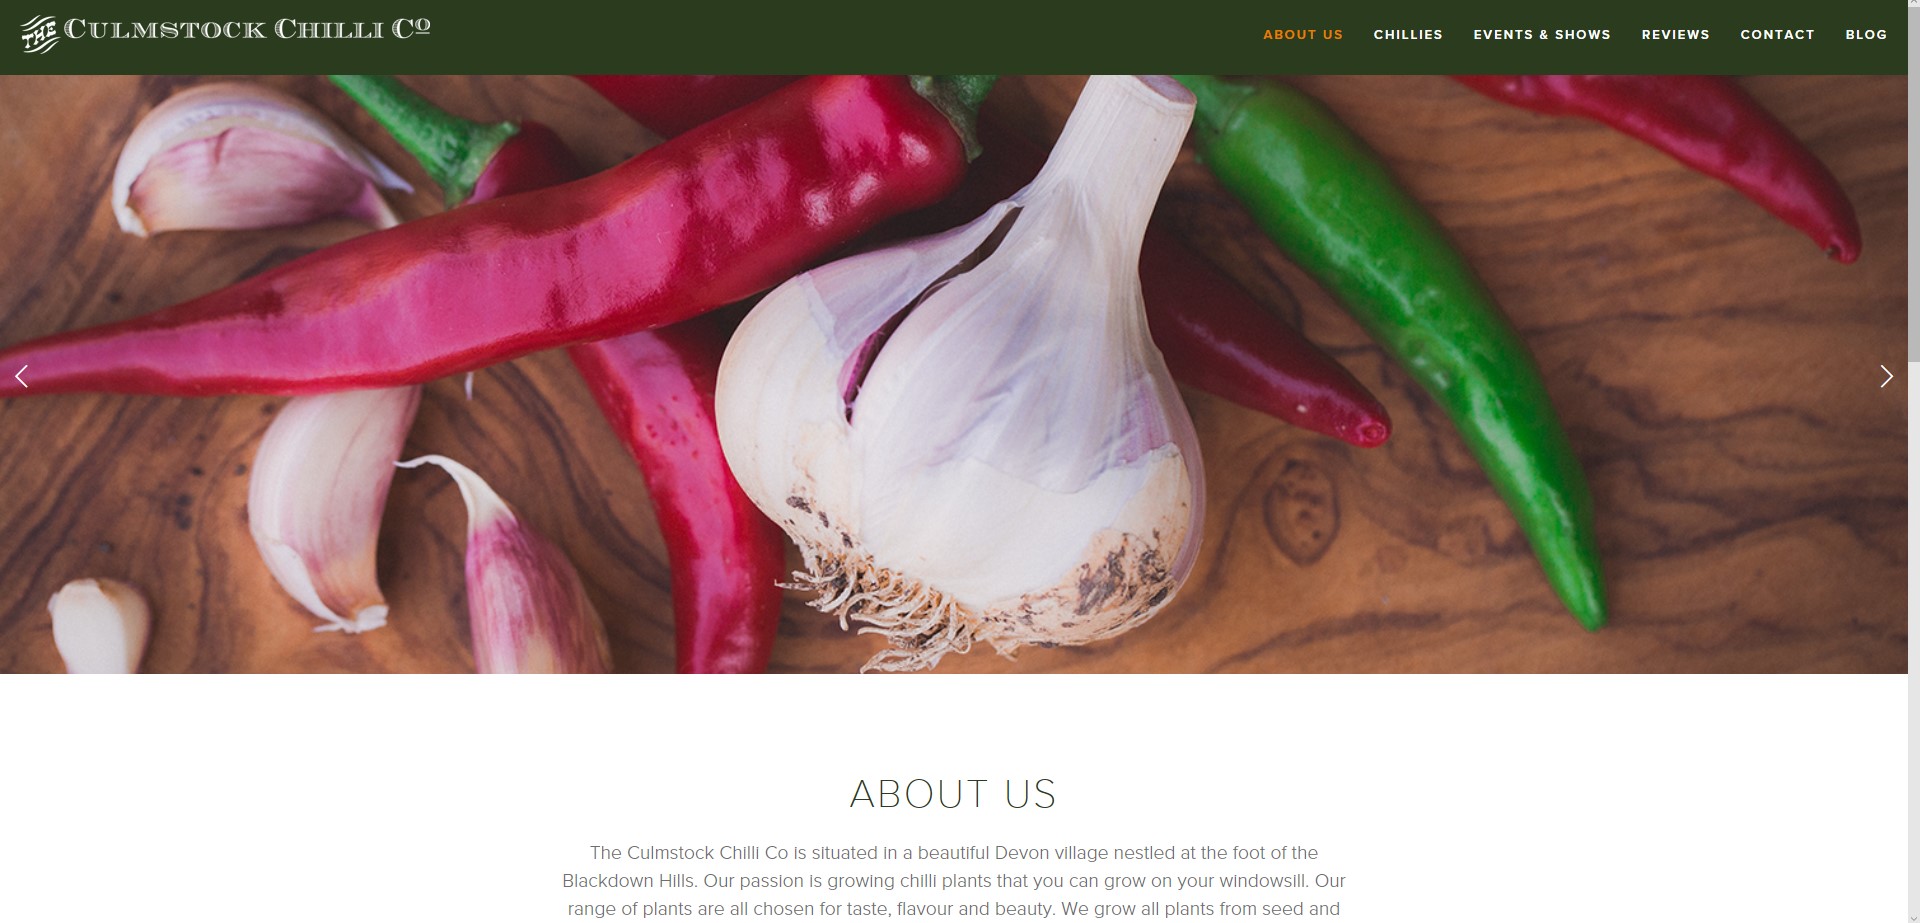 Screen shot of the About Us page on the Culmstock Chilli Co Website, commercial shoot by Perspectives Photography